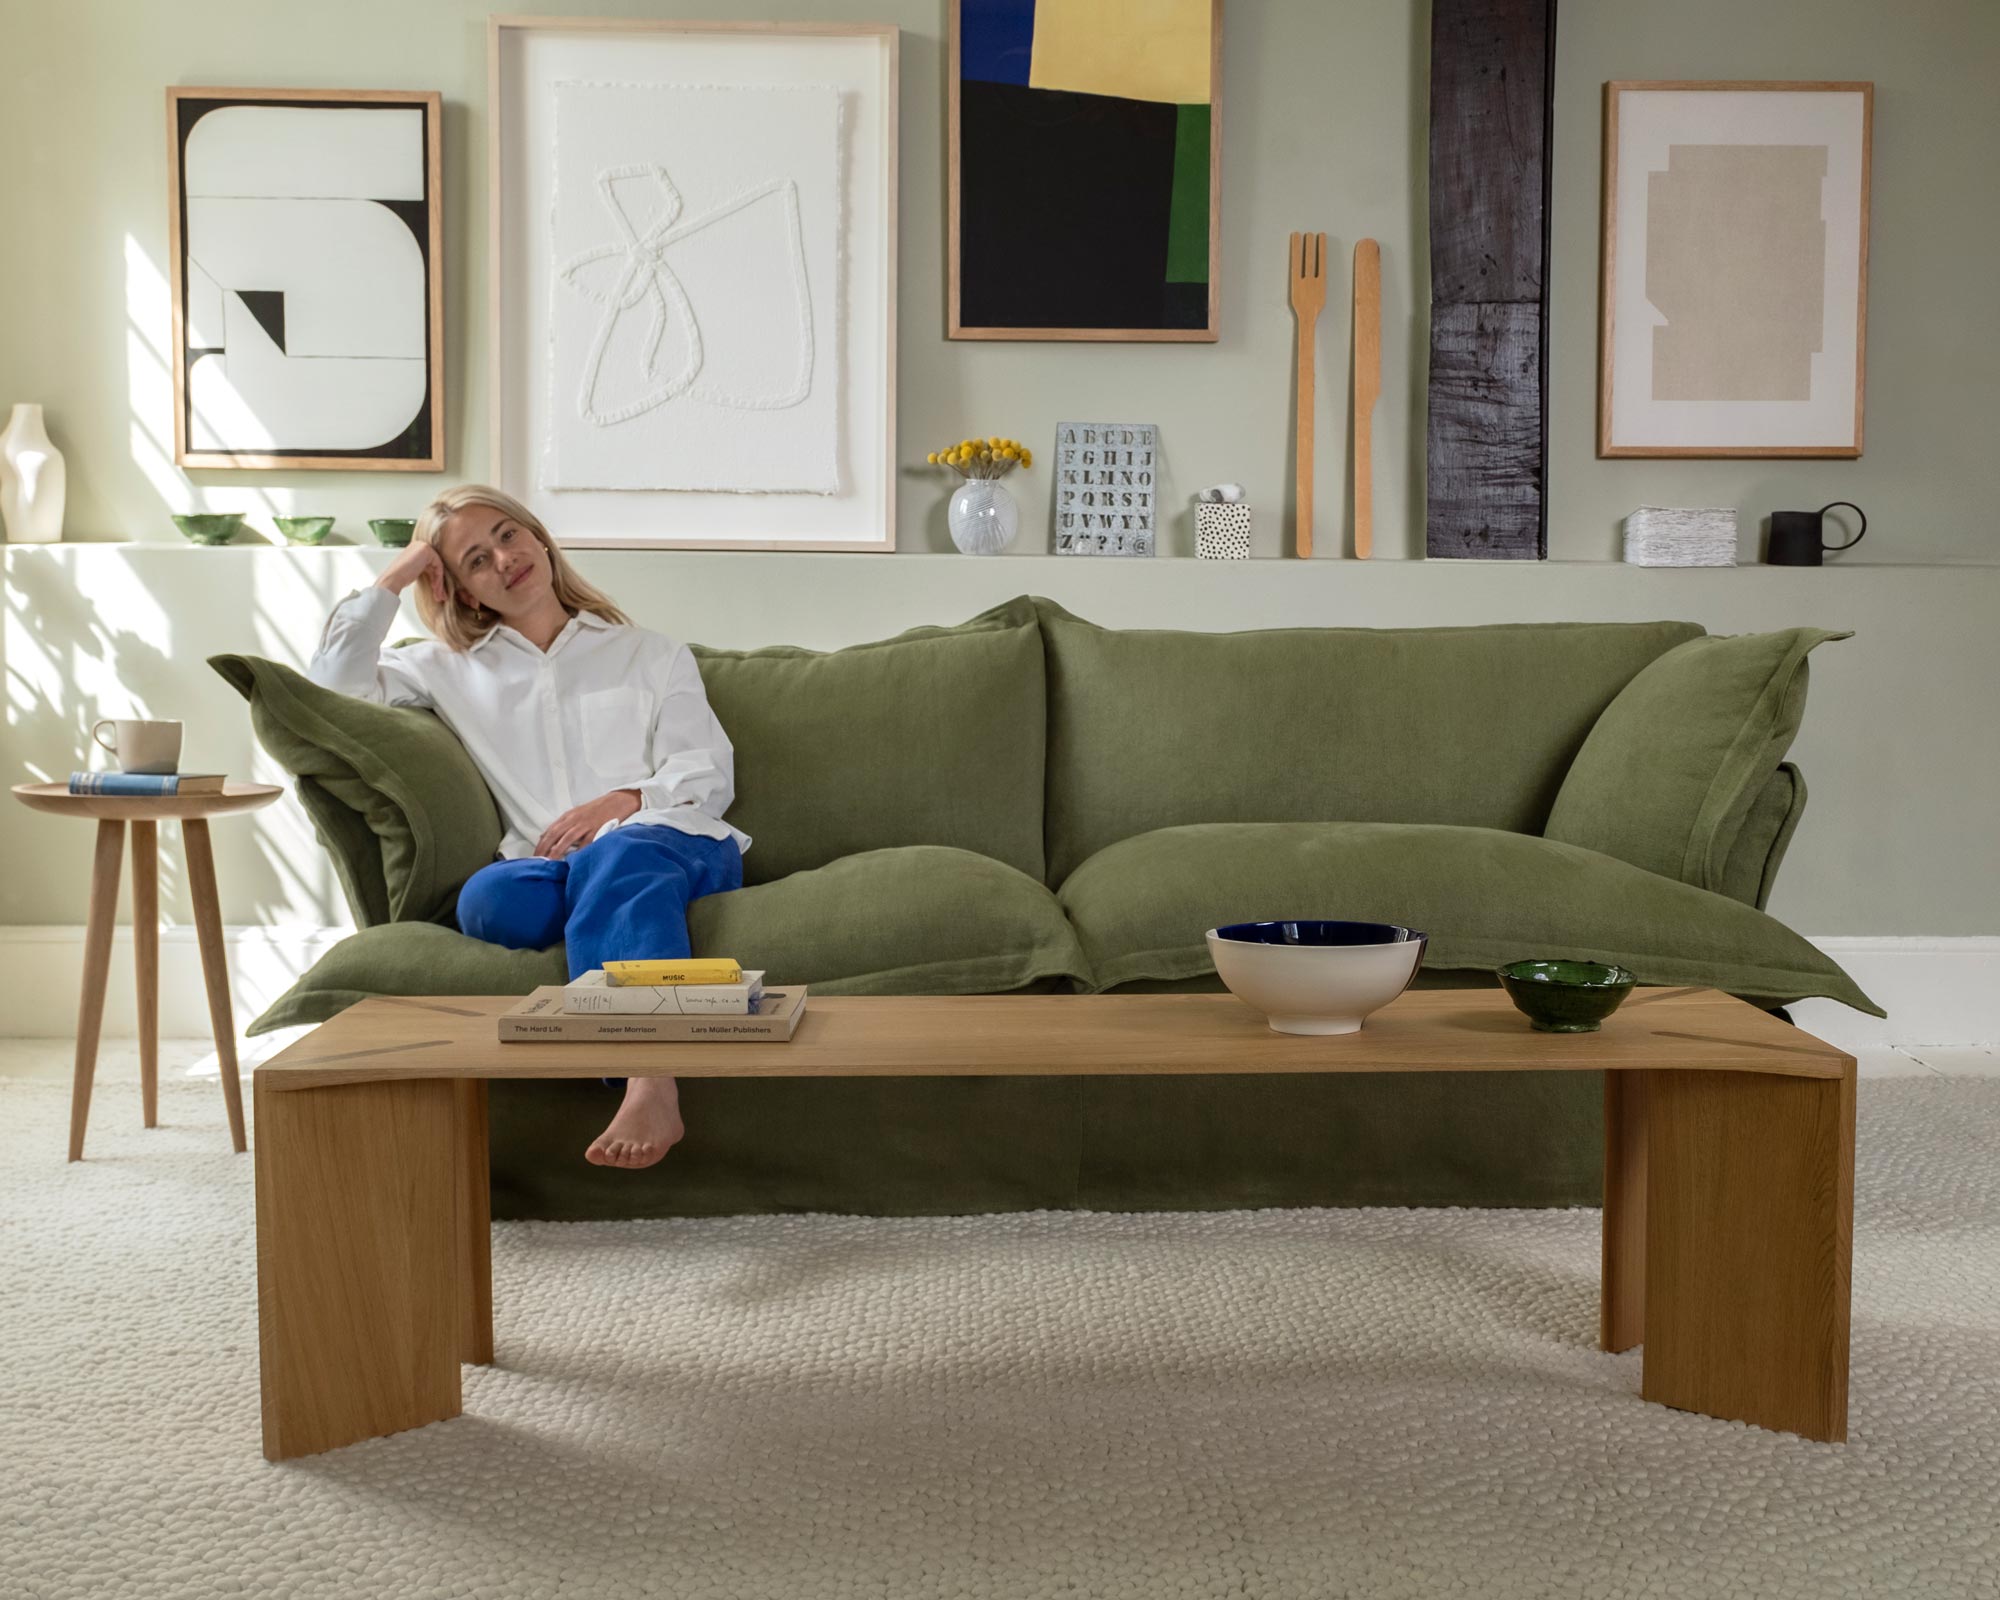 Marnie sitting on the left hand side of a malachite green sofa. In front of her is a Dove coffee table styled with a large bowl and books.